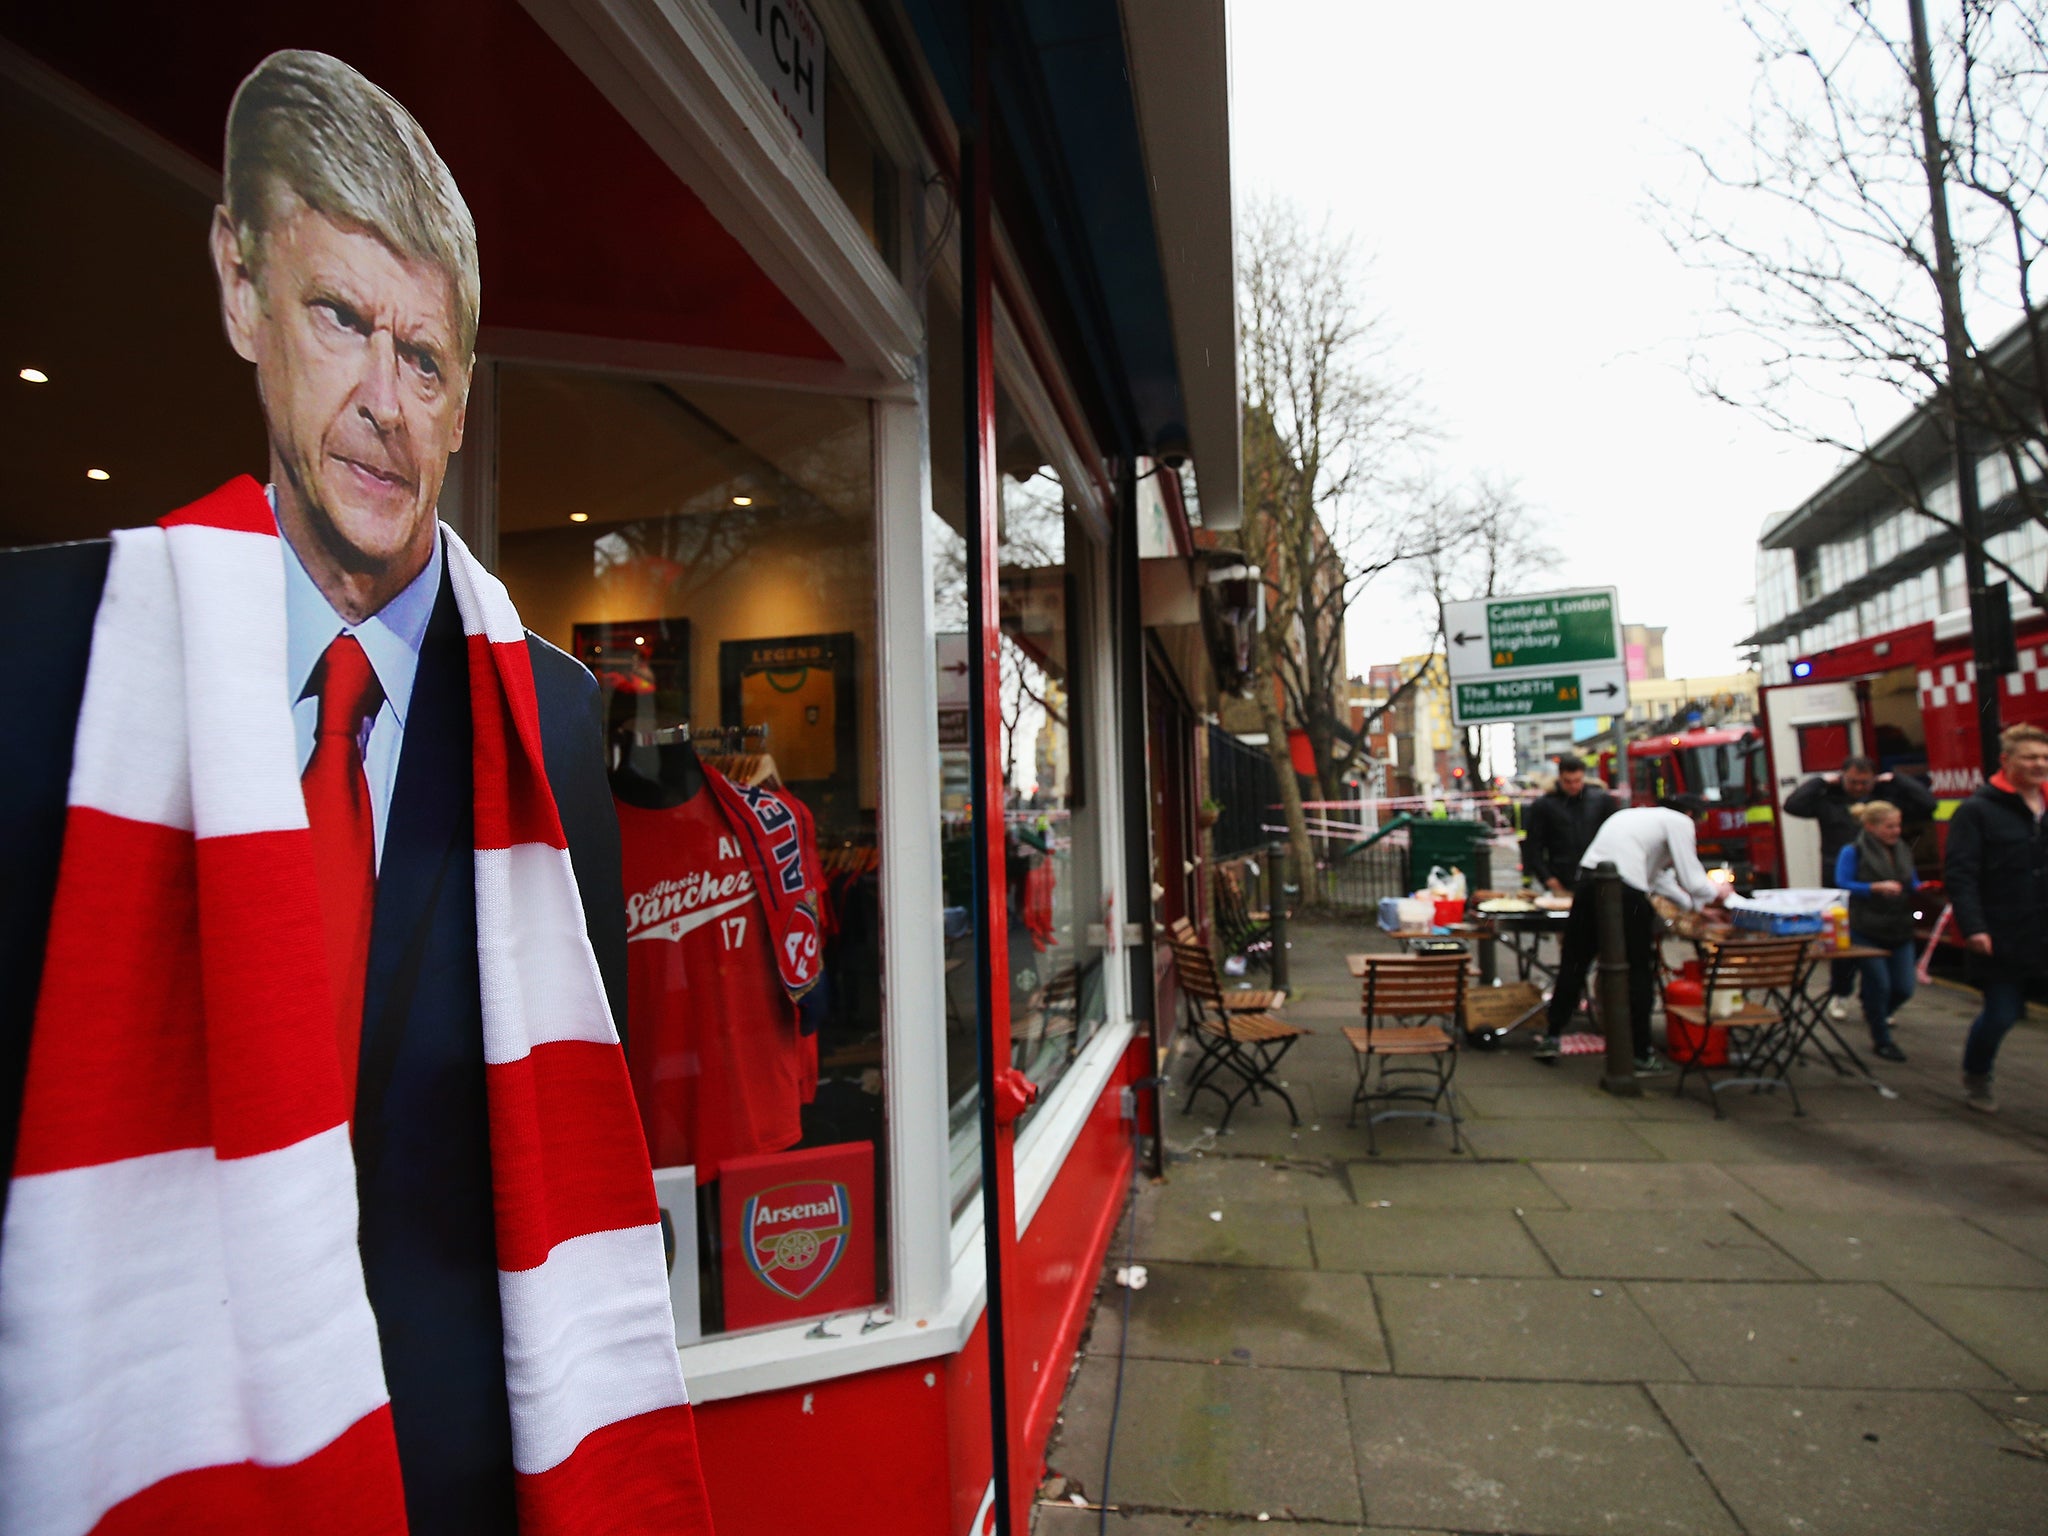 A cardboard cut-out of Arsene Wenger, manager of Arsenal, stands in the doorway of The Match Day shop prior to the Premier League match between Arsenal and Liverpool